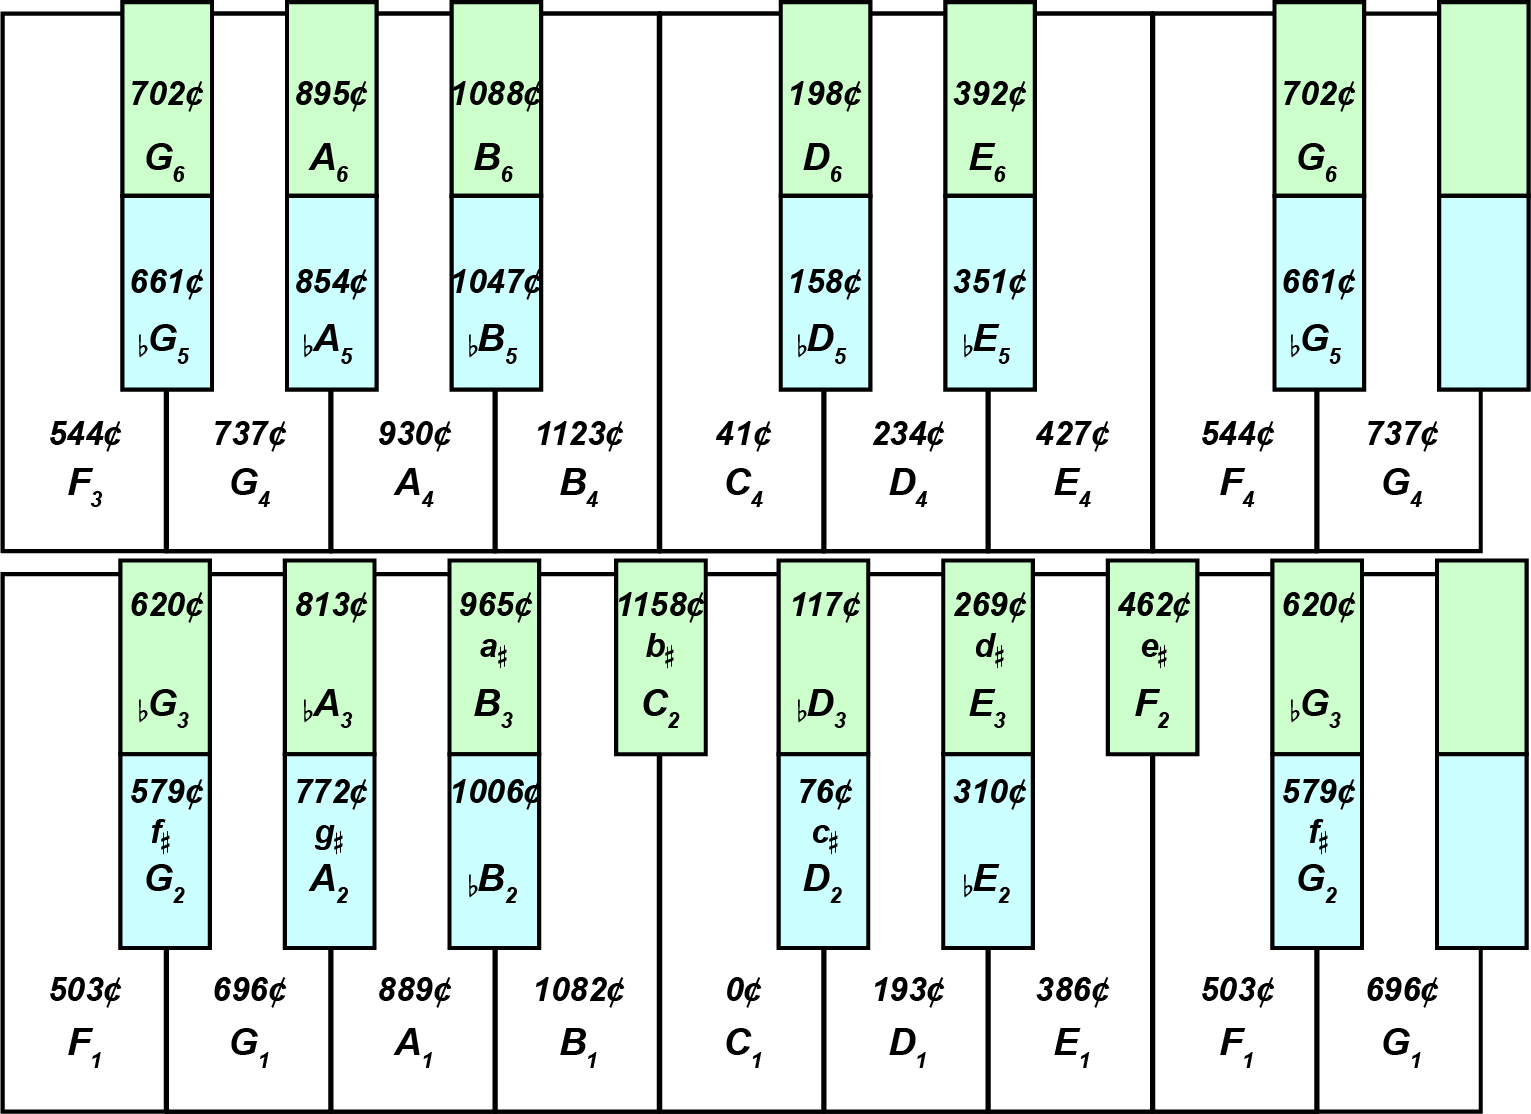 The Archicembalo had a large number of tuning alternatives for the 12 keys of the chromatic scale.